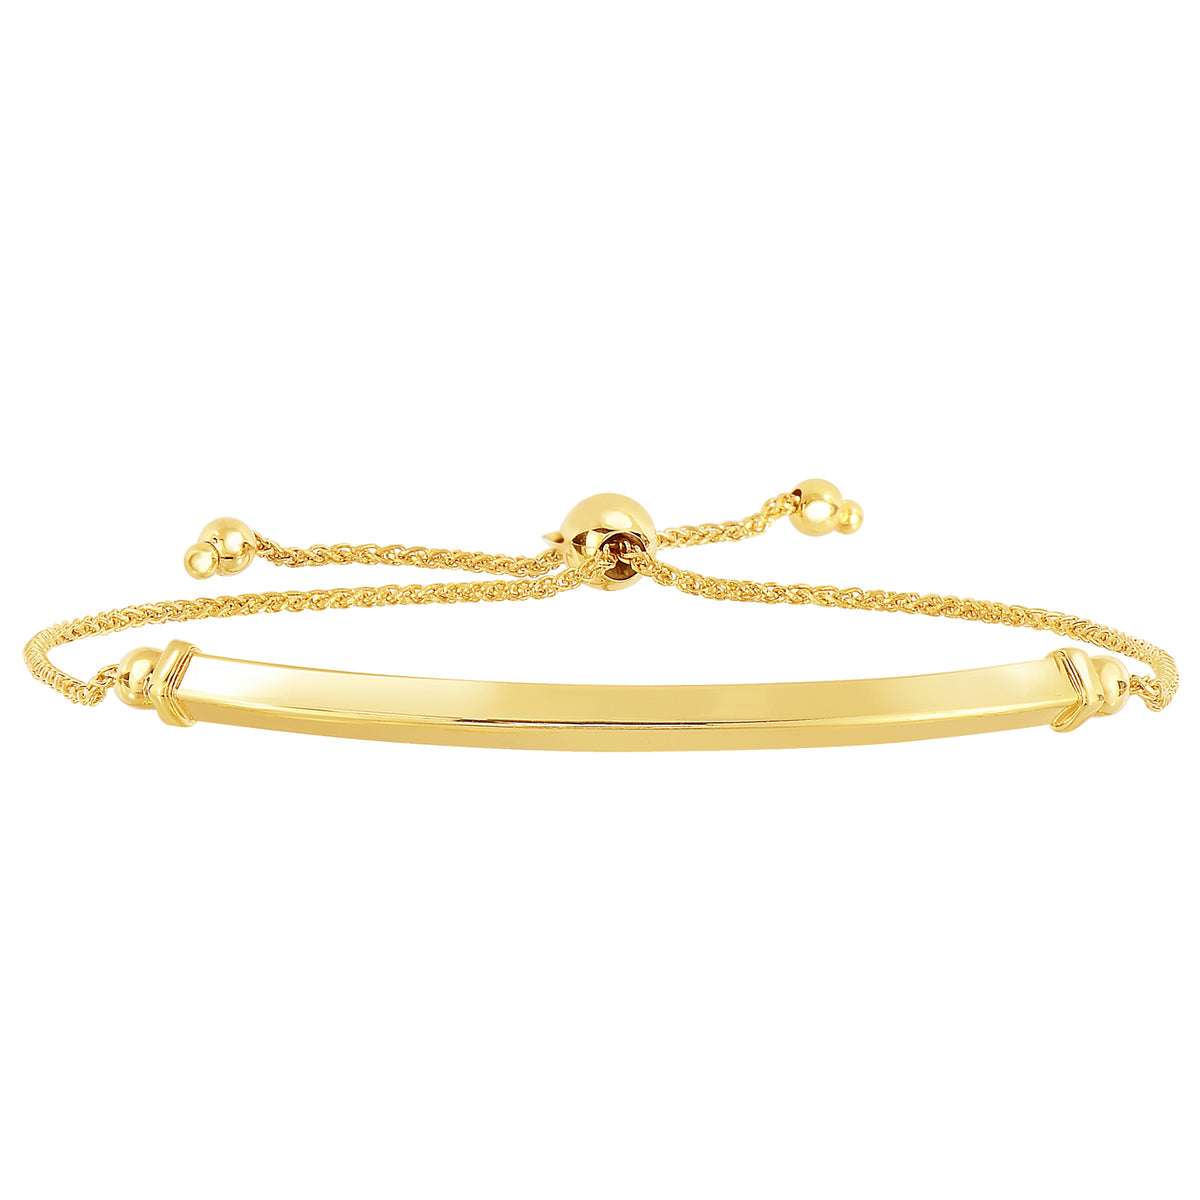 14K Yellow Gold Diamond Cut Round Wheat Adjustable Bracelet With Shiny Arched Bar Center Element, 9.25" fine designer jewelry for men and women